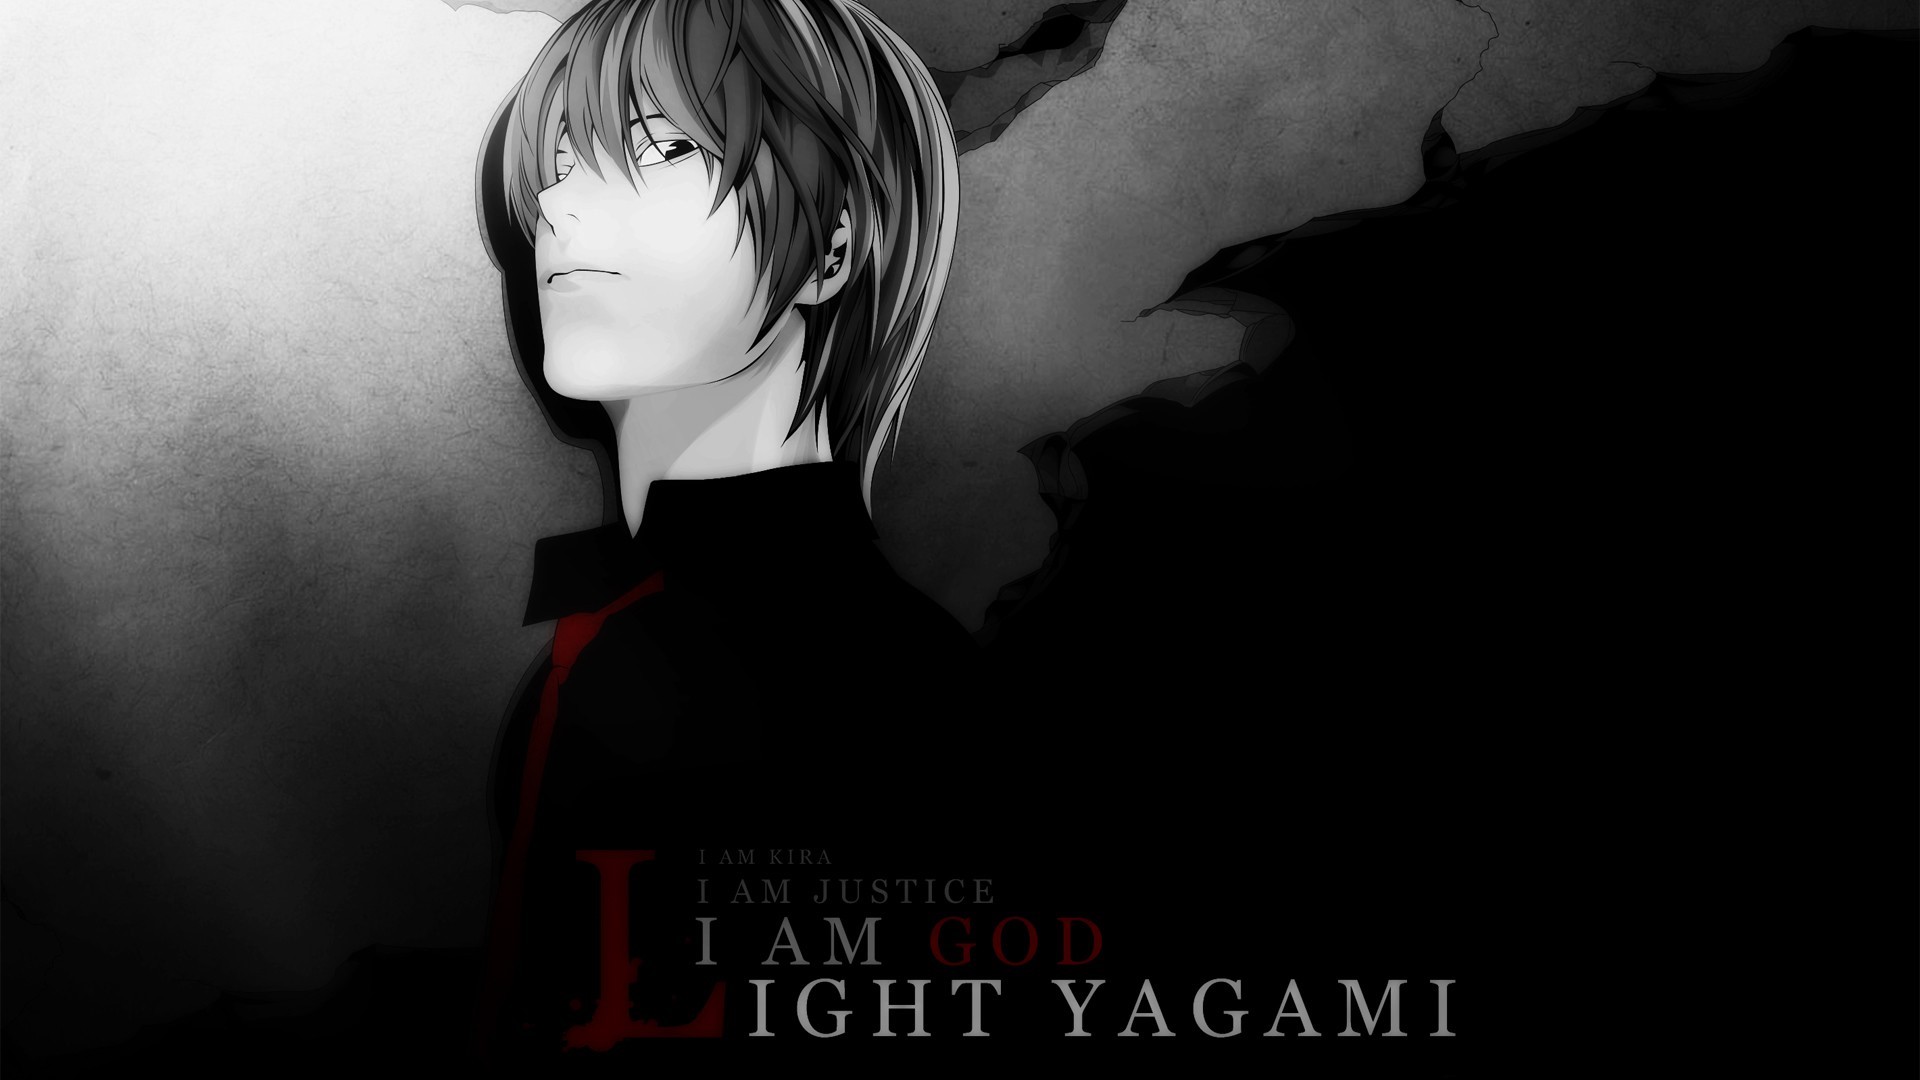 Light Yagami from Death Note Anime Wallpaper Full HD ID:9